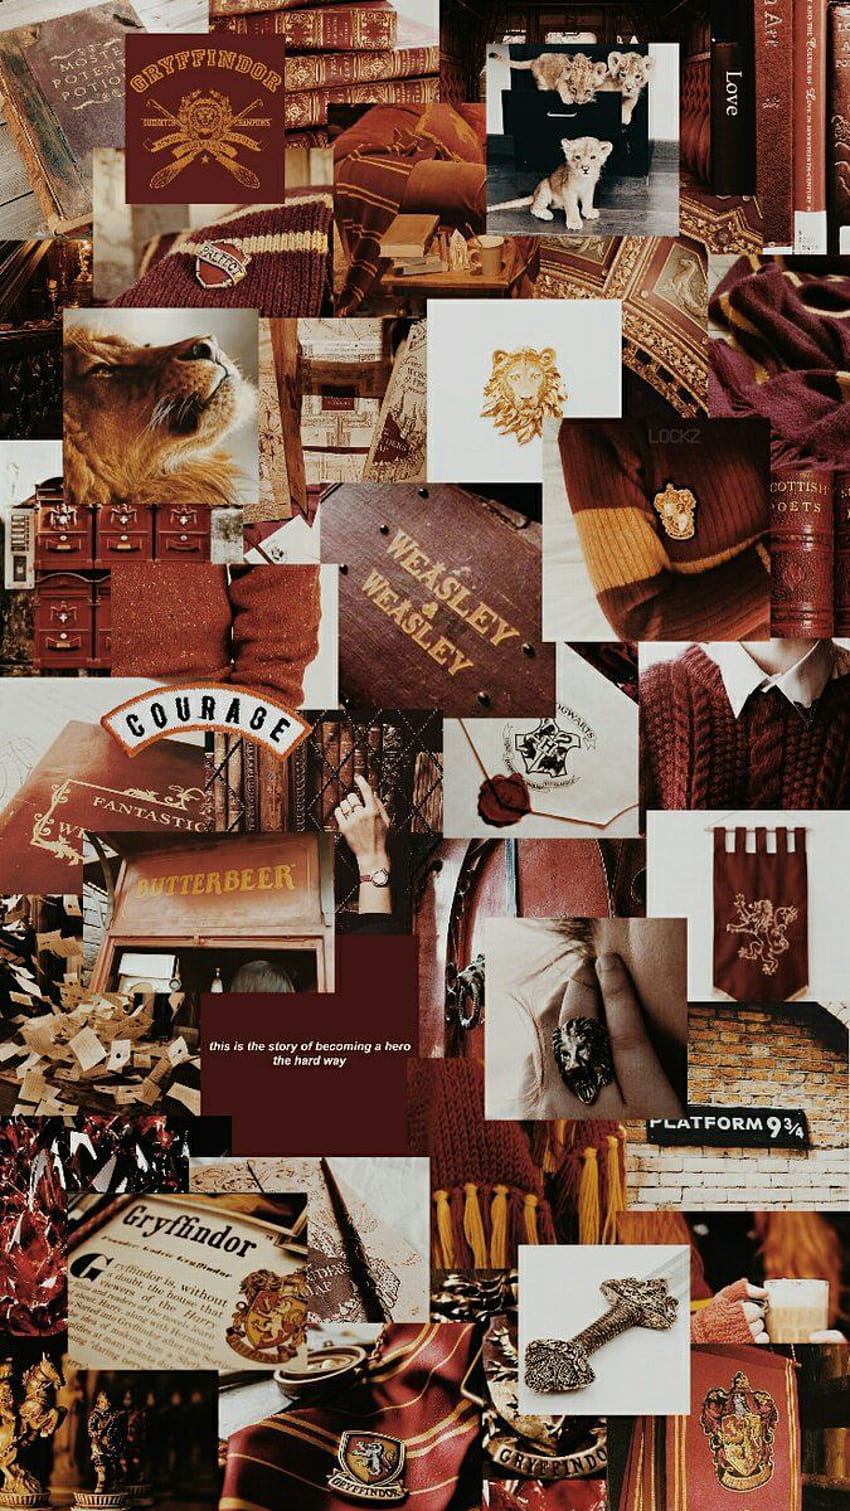 A collage of various items from harry potter - Gryffindor